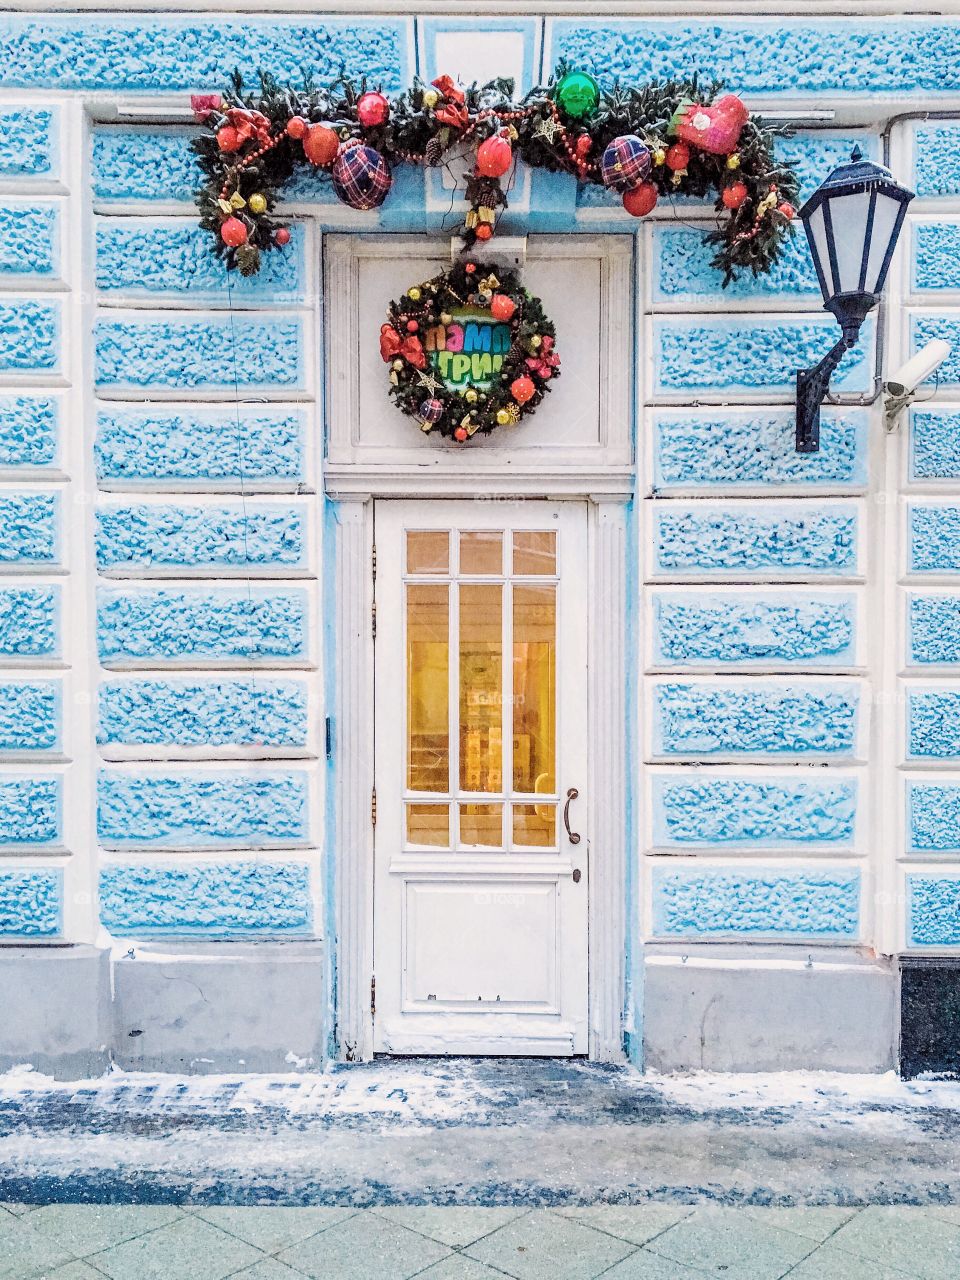 Cute door with Christmas decoration